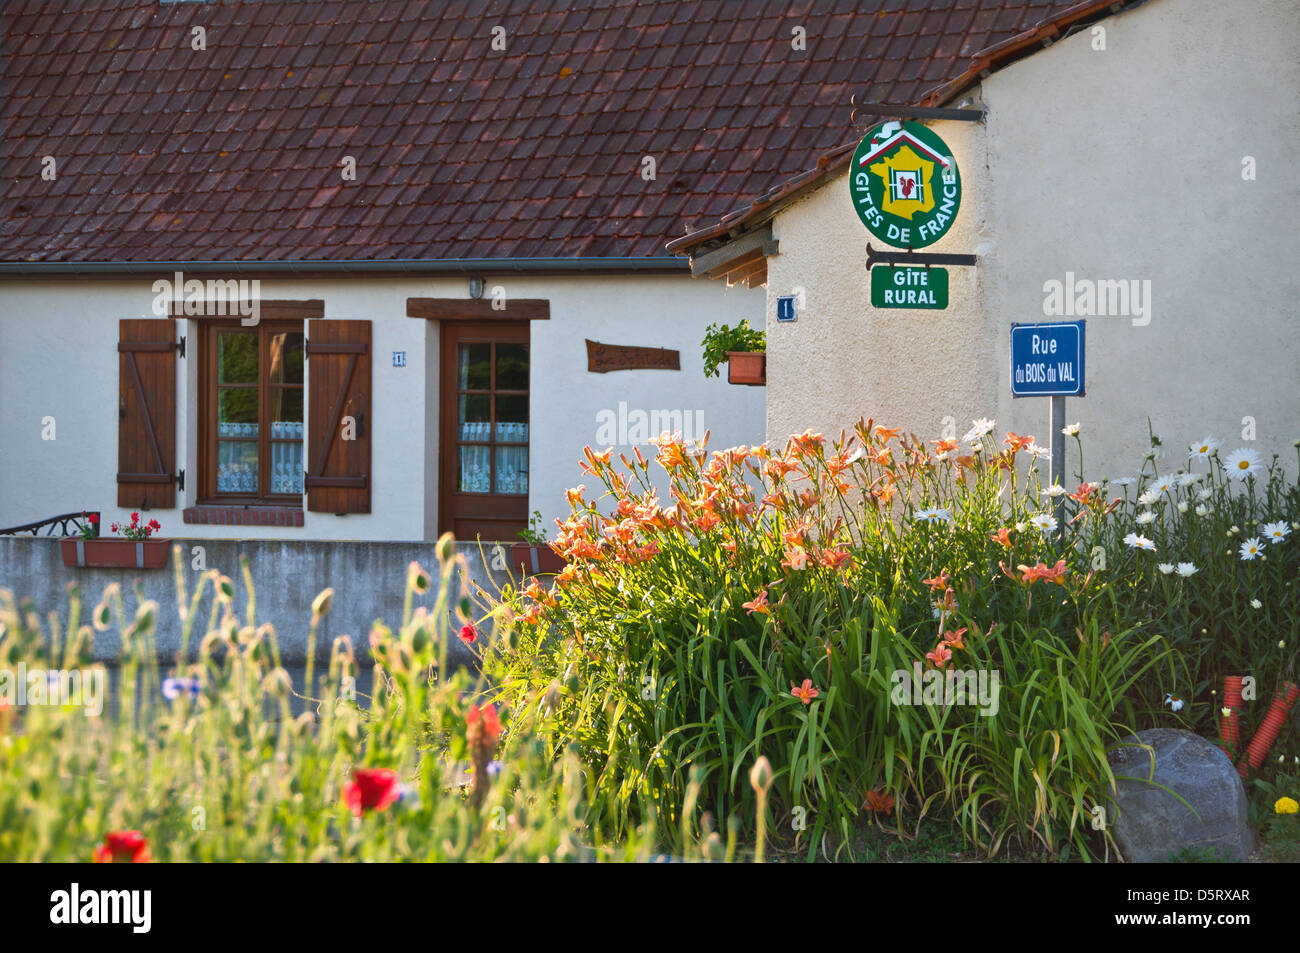 Gite Rural French B&B sign for bed and breakfast accommodation on cottage in sunny floral french countryside village France Stock Photo